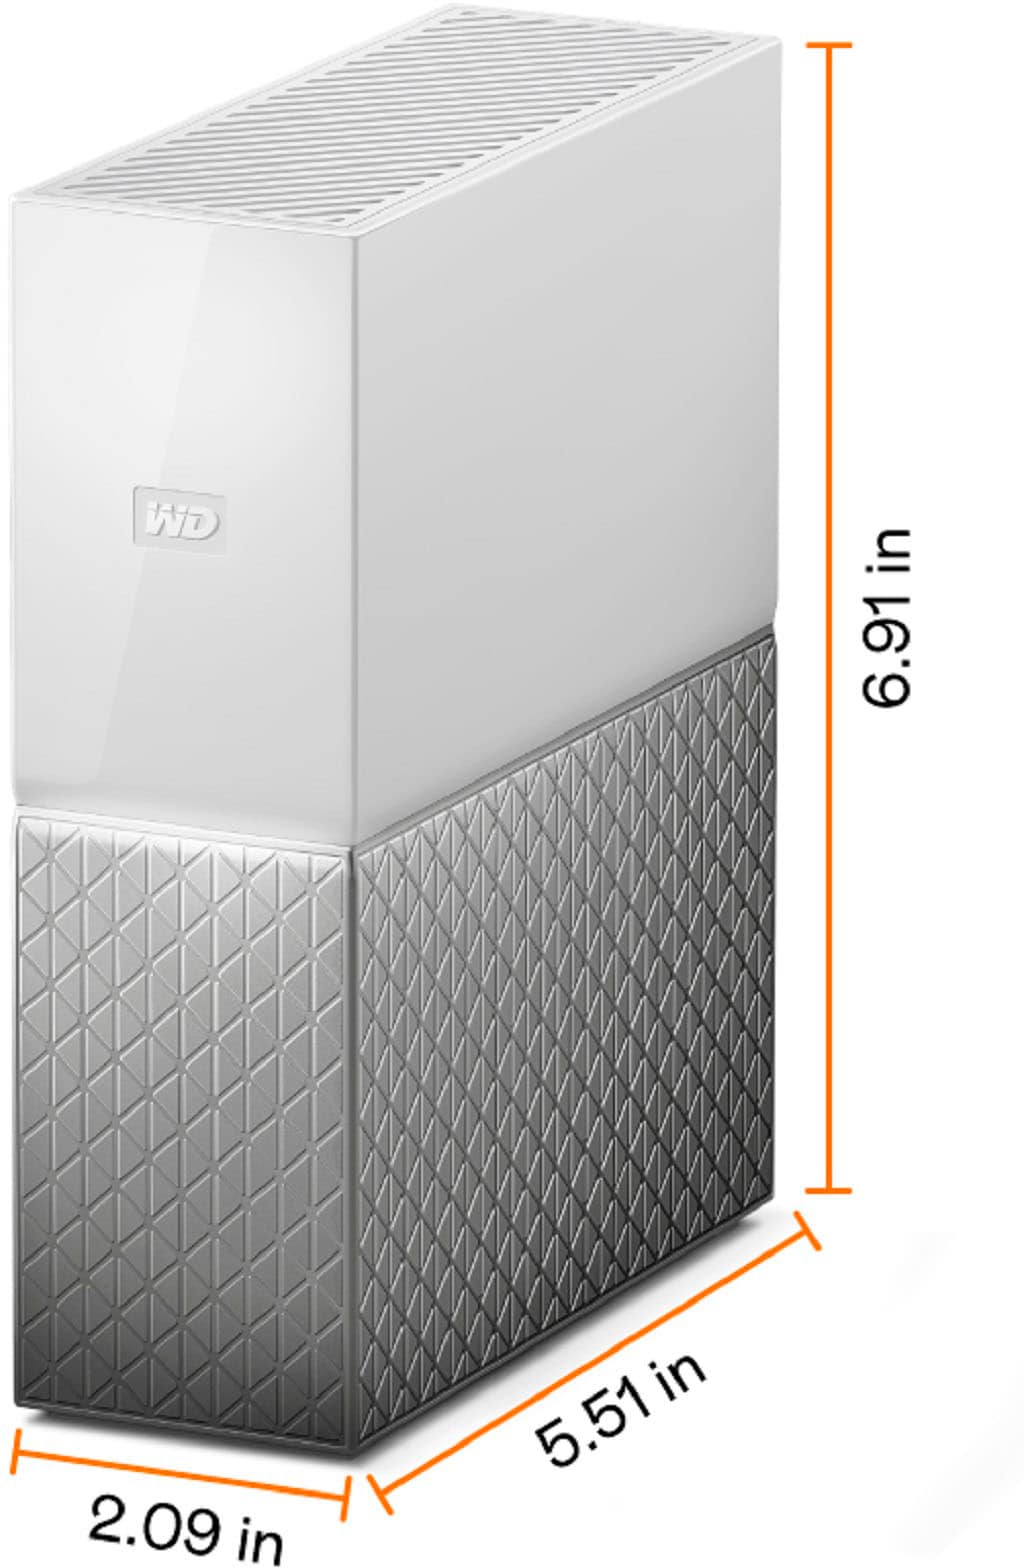 WD - My Cloud Home 4TB Personal Cloud - White_1